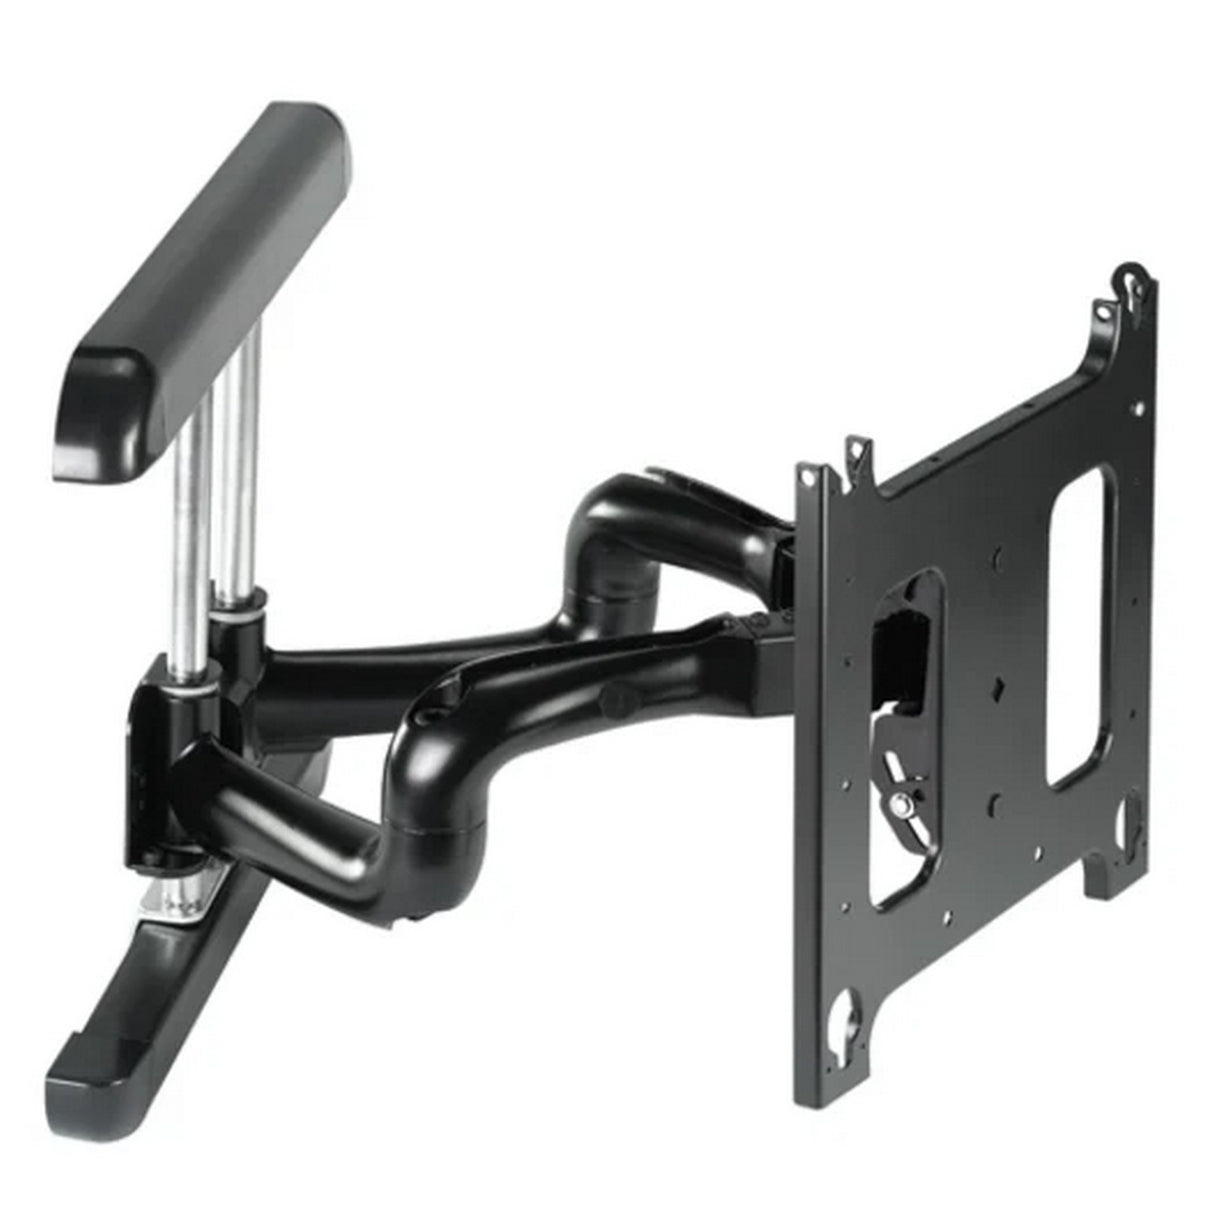 Chief PNRUB Large Flat Panel Swing Arm Wall Display Mount, 25-Inch Extension